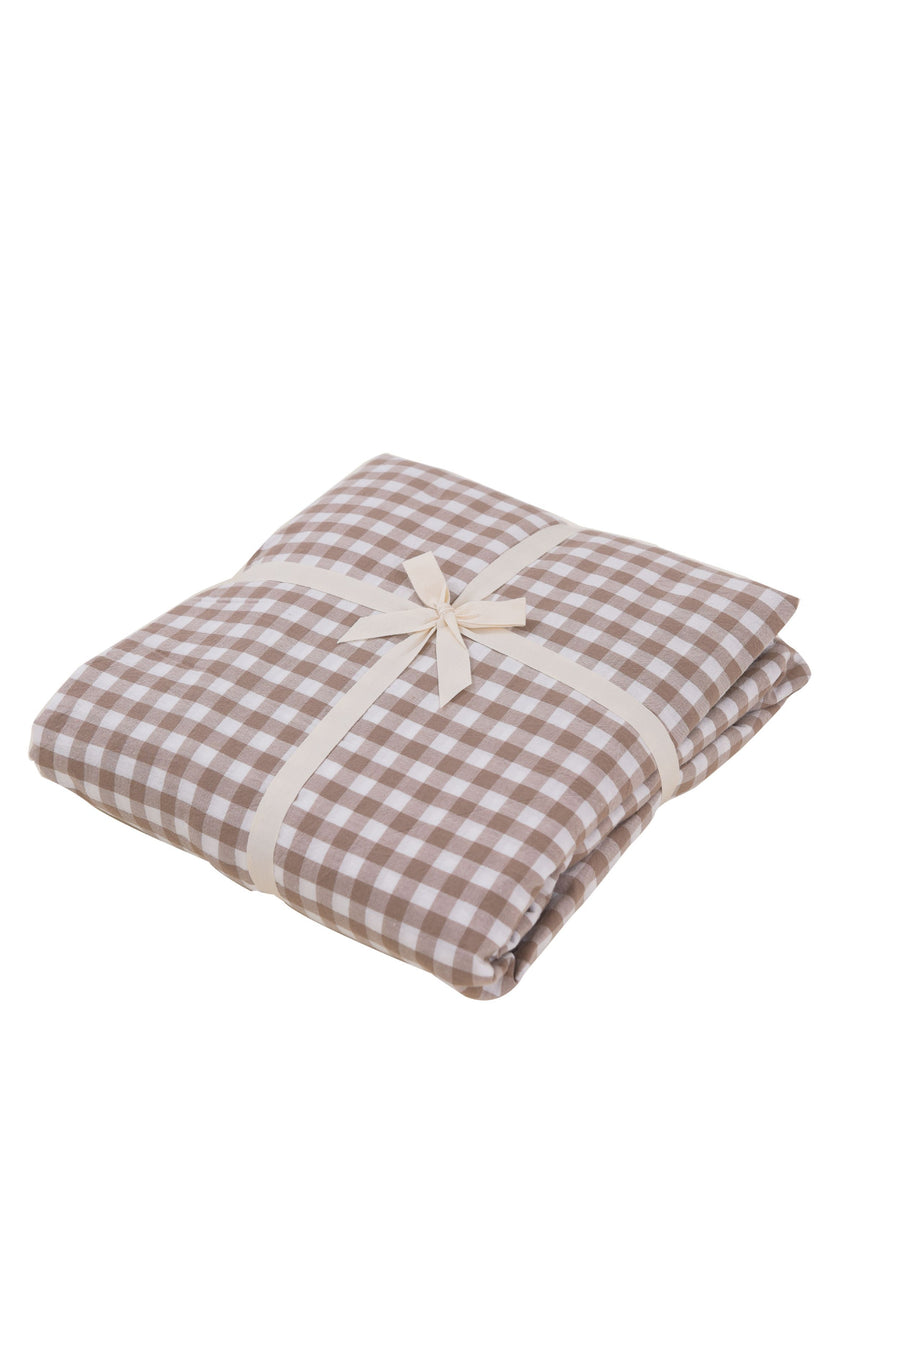 Elly Gingham SS 3-pc Fitted Sheet Set (Tortilla)